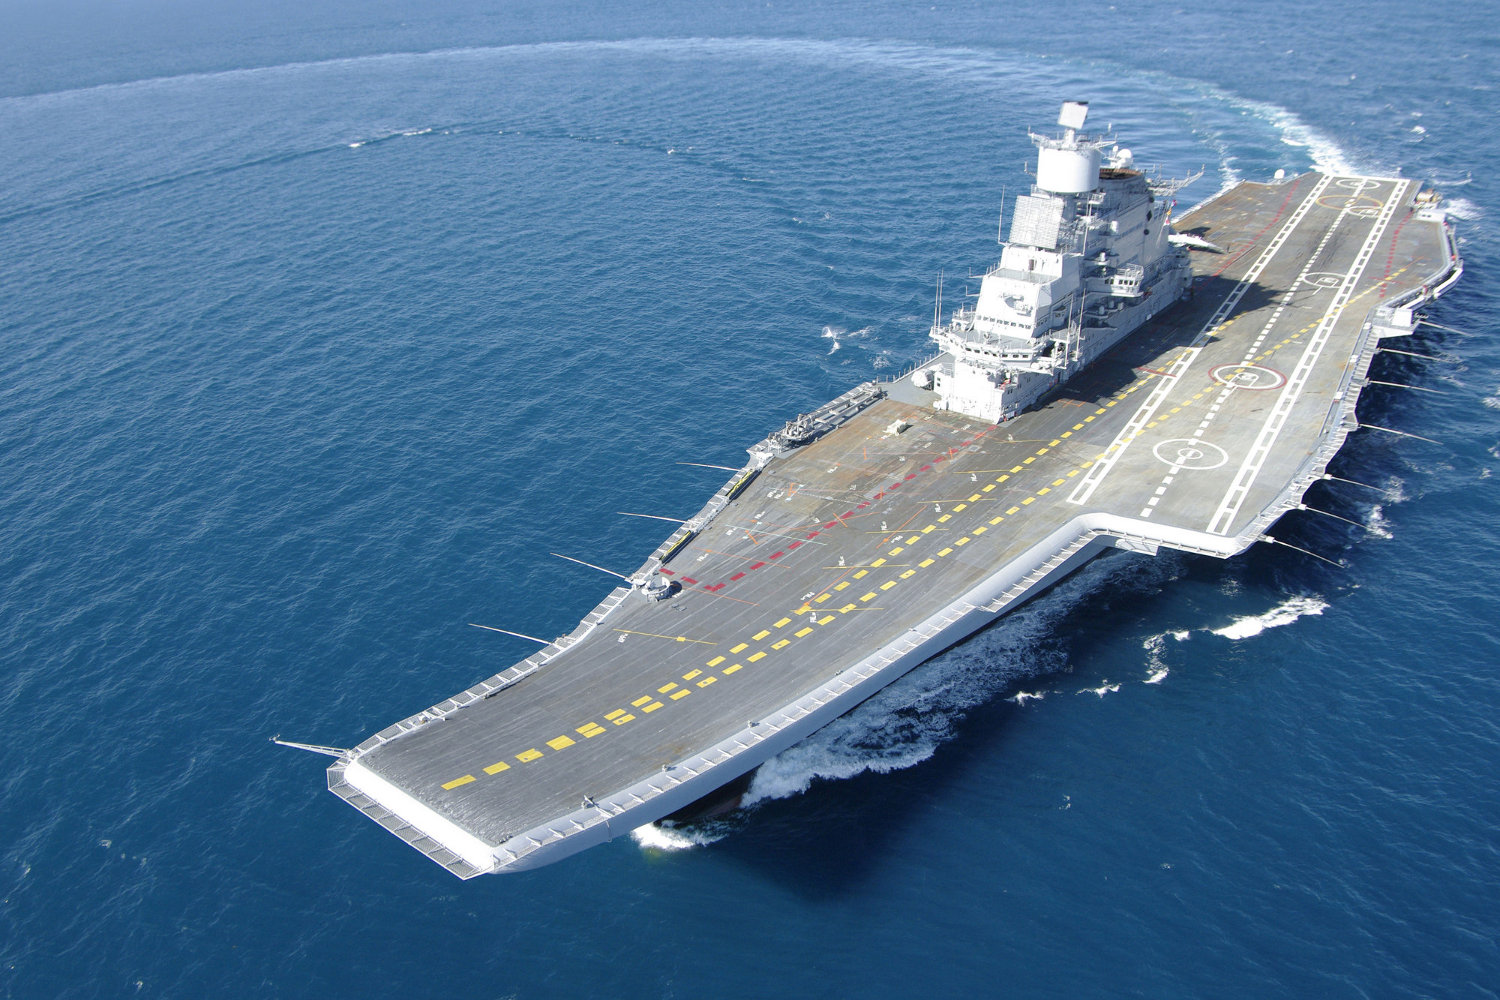 Indian Navy’s Aircraft Carrier INS Vikramaditya To Conduct Sea Trials After Major Refit